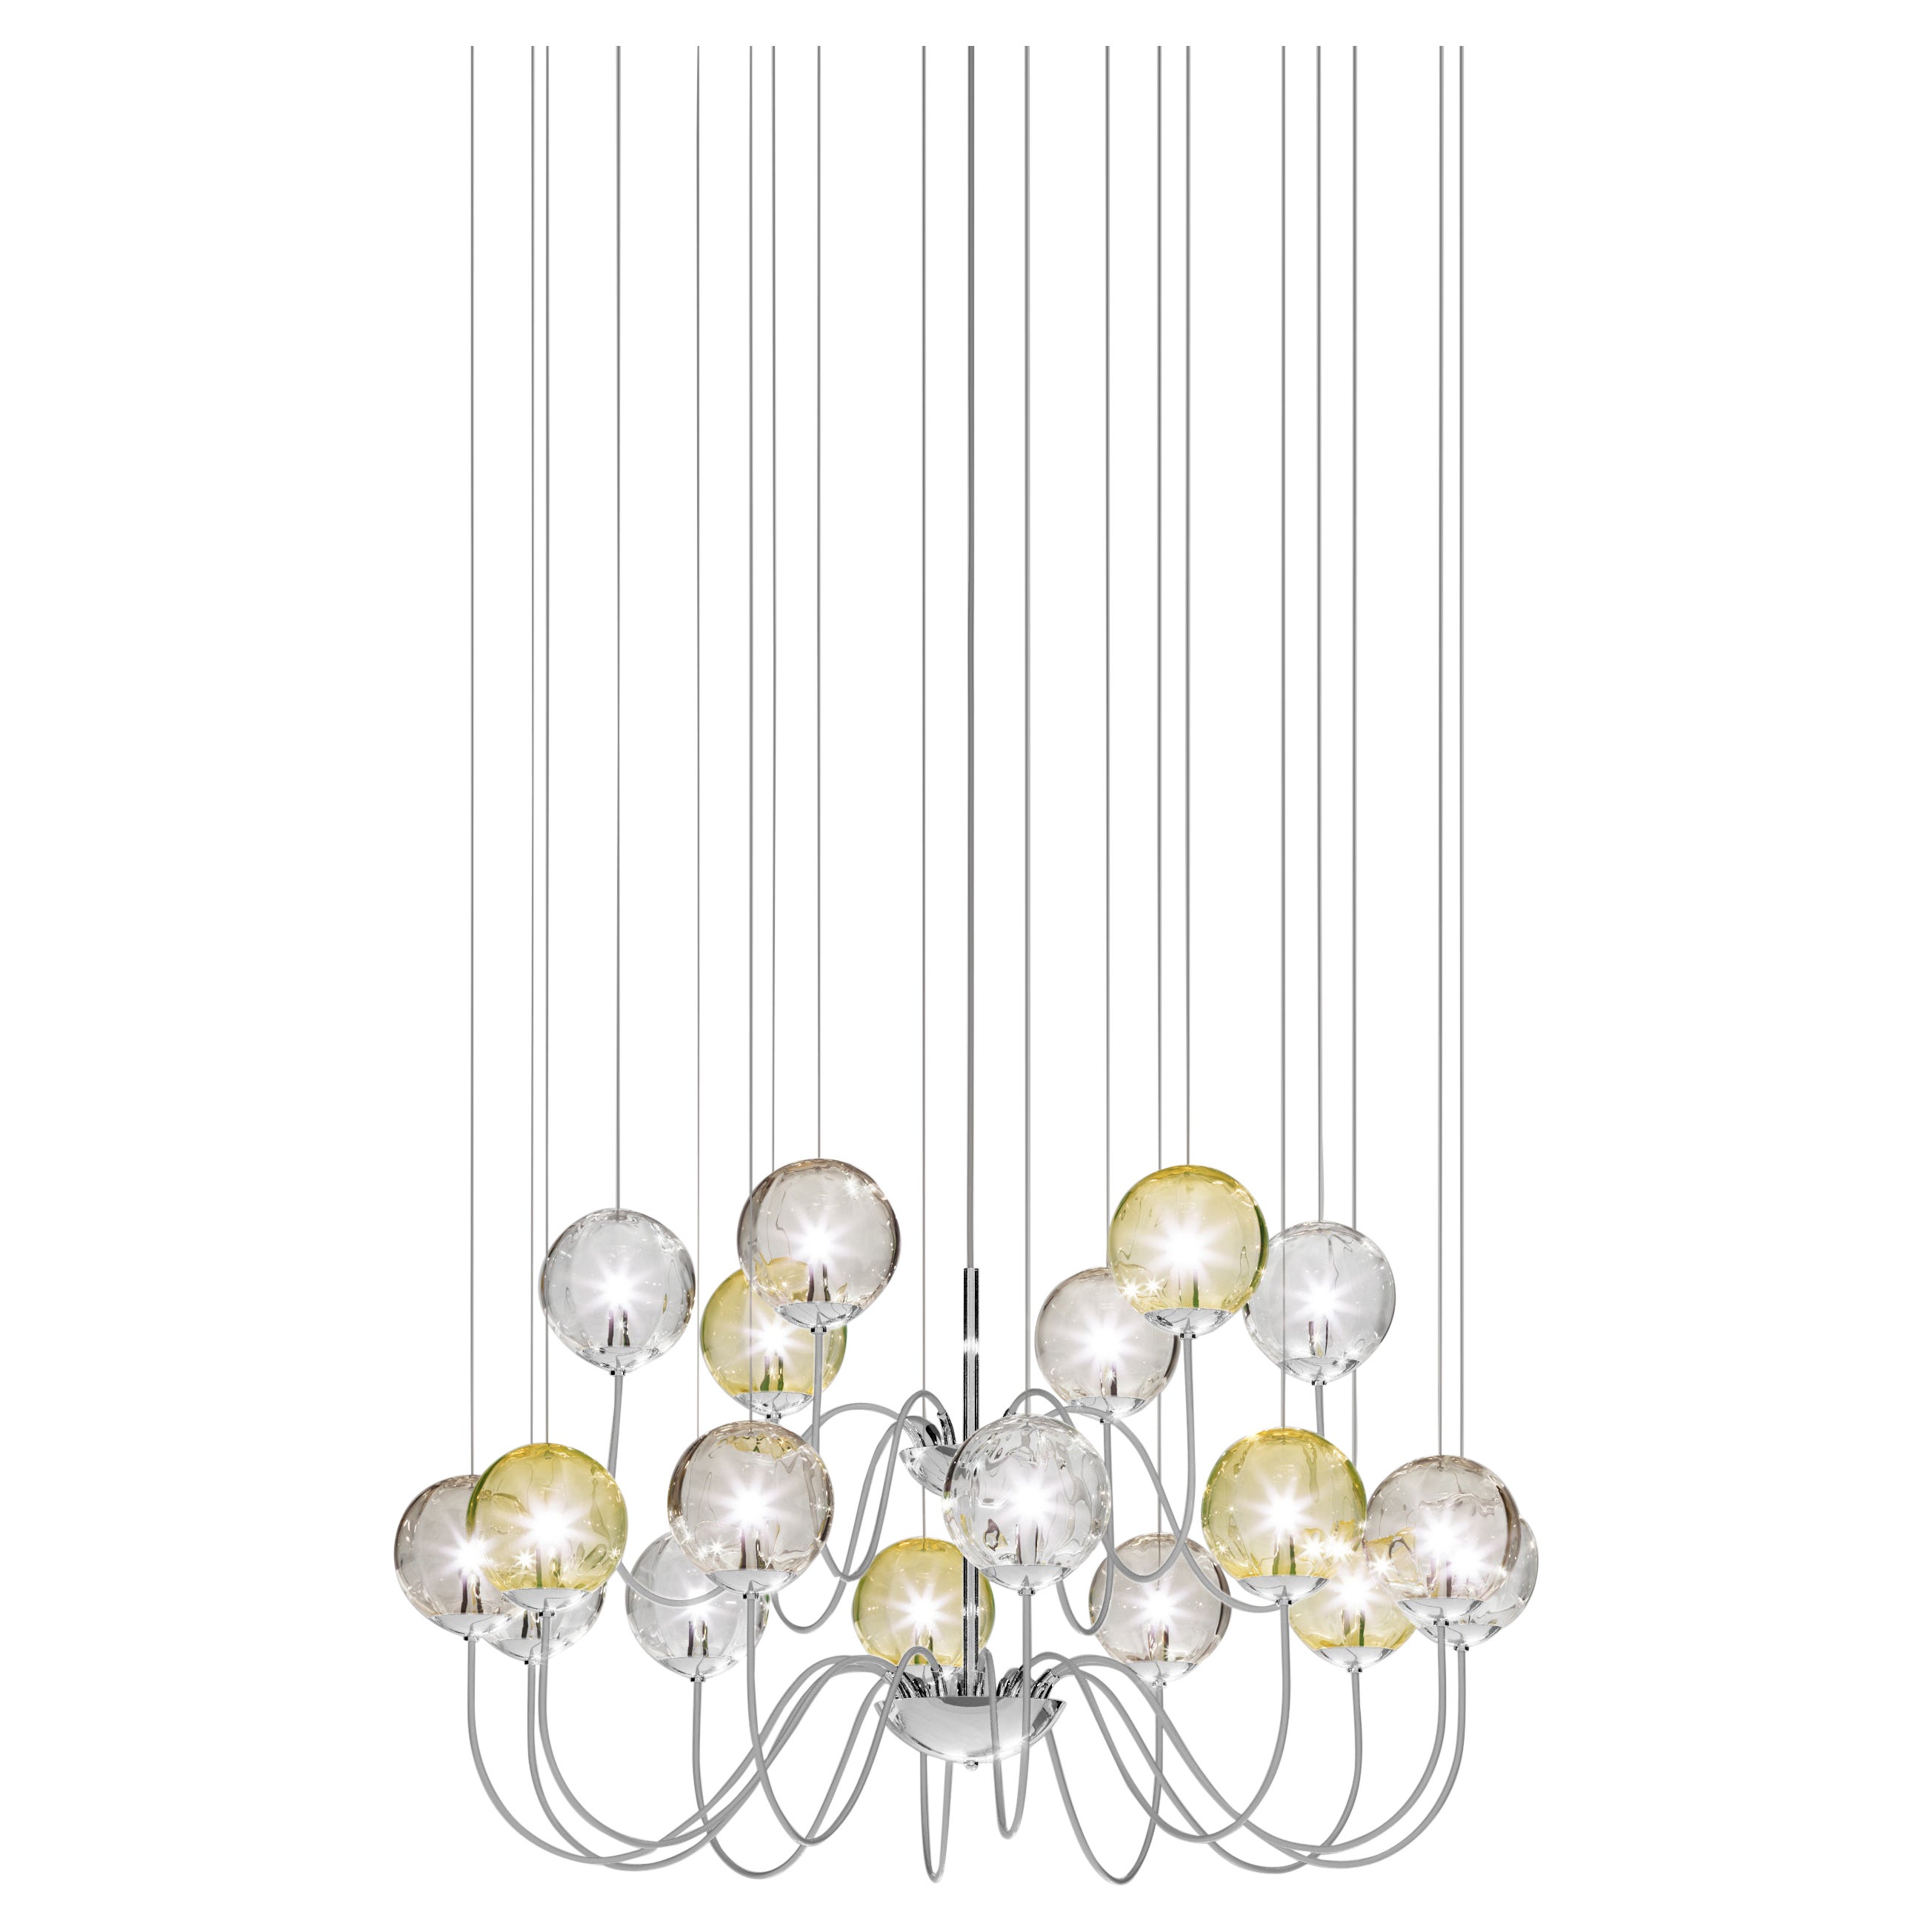 Vistosi Puppet Pendant Light in Multicolor Glass And Glossy Chrome Frame